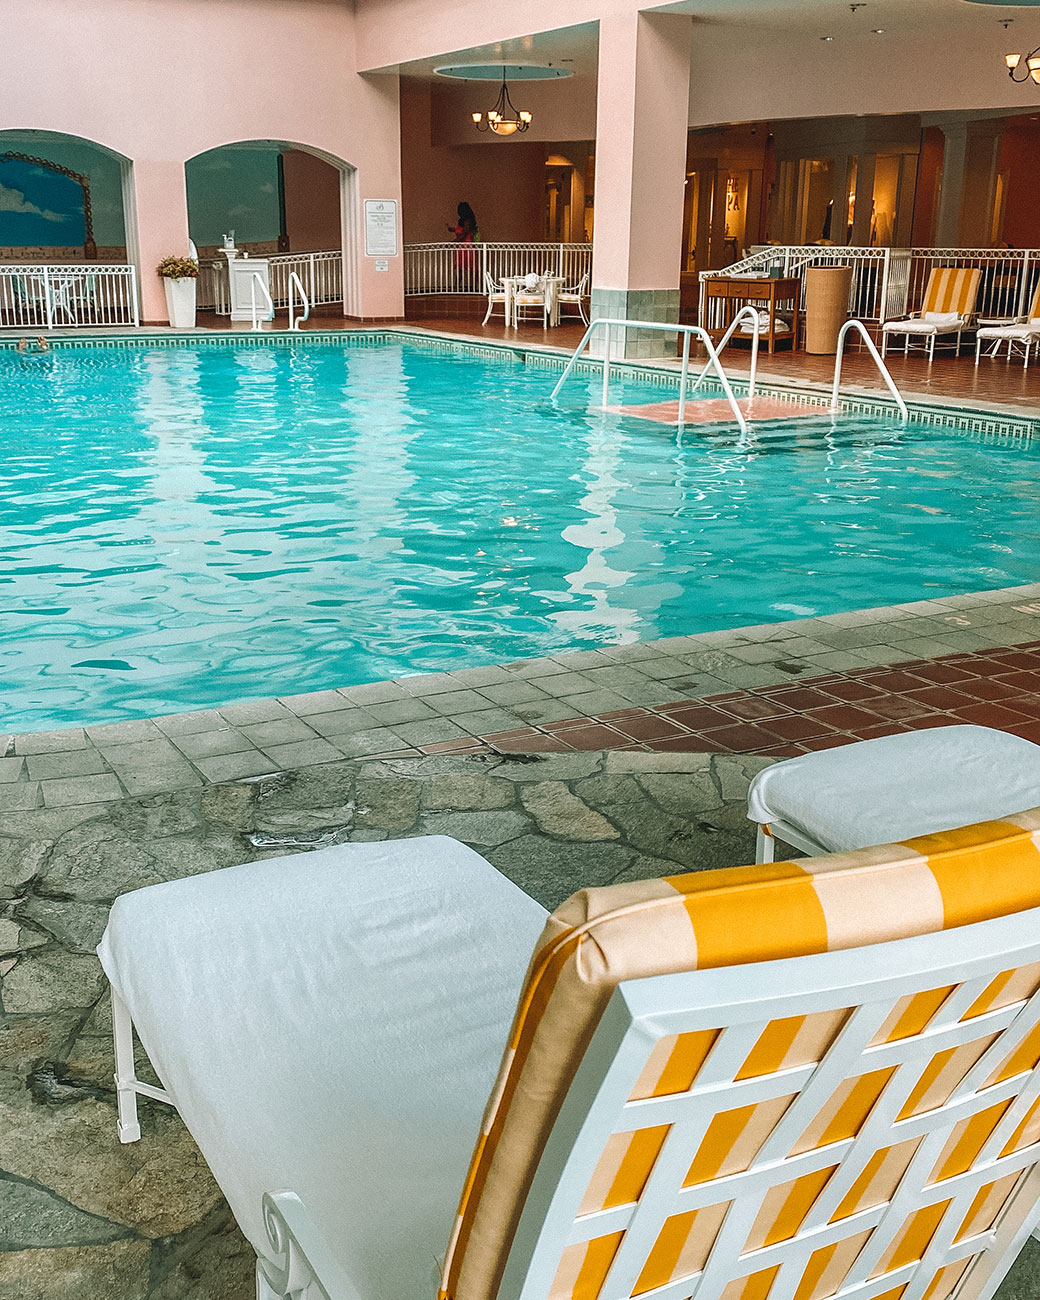 The Broadmoor | Swimming pool in The Broadmoor | The Broadmoor hotel | The Broadmoor resort | Colorado Springs resorts | Things to do at The Broadmoor | Travel Blogger | Bubbly Moments